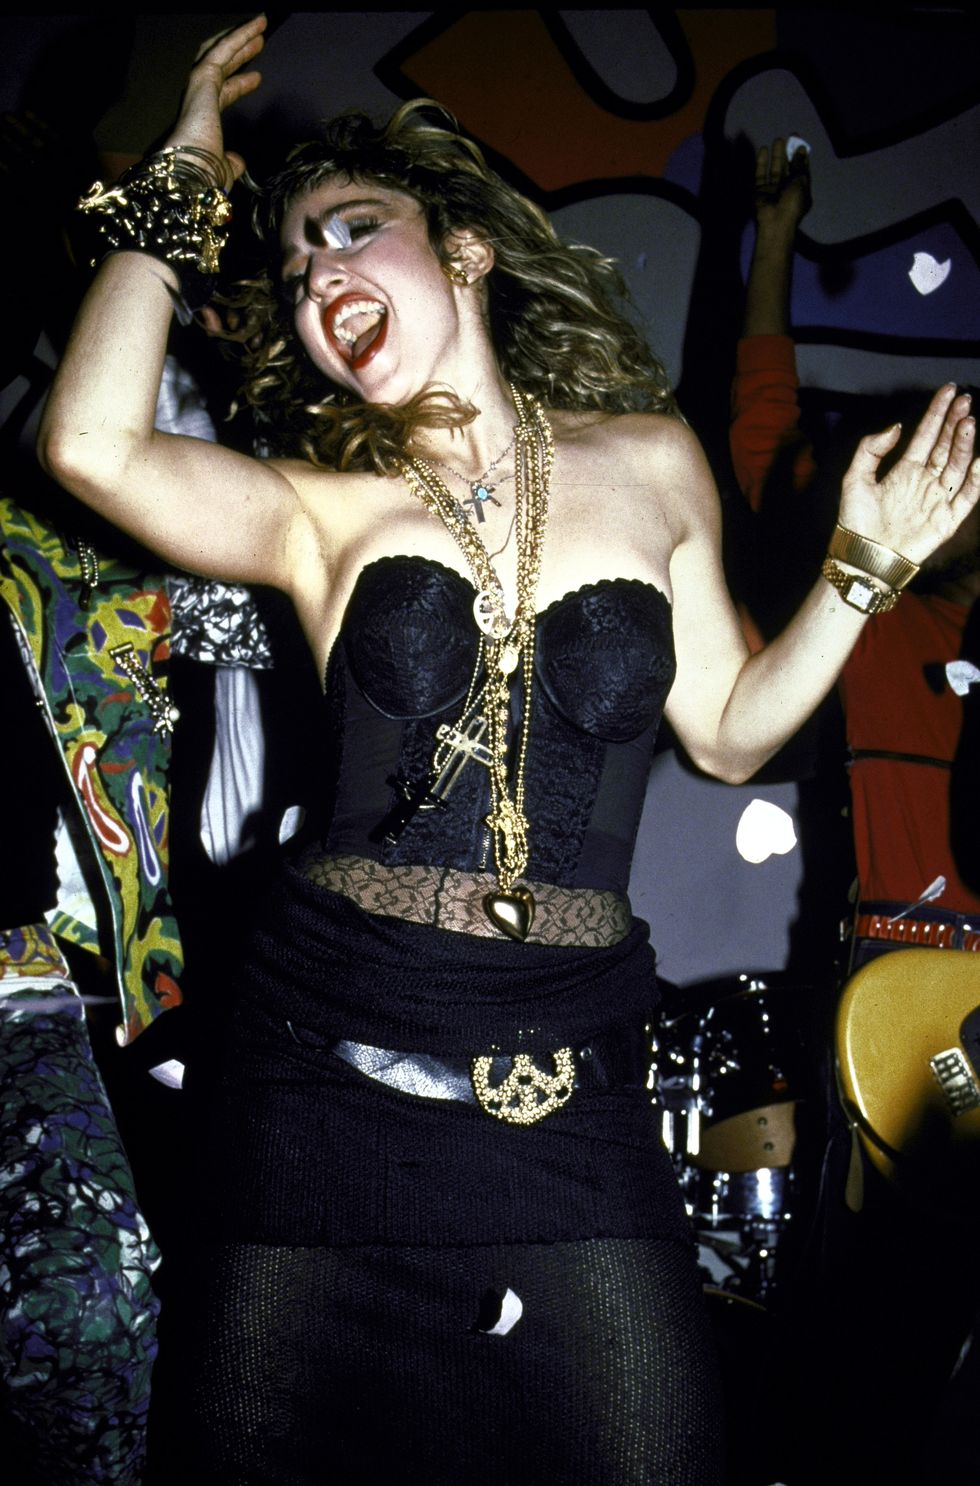 singer madonna performing  photo by david mcgoughdmithe life picture collection via getty images